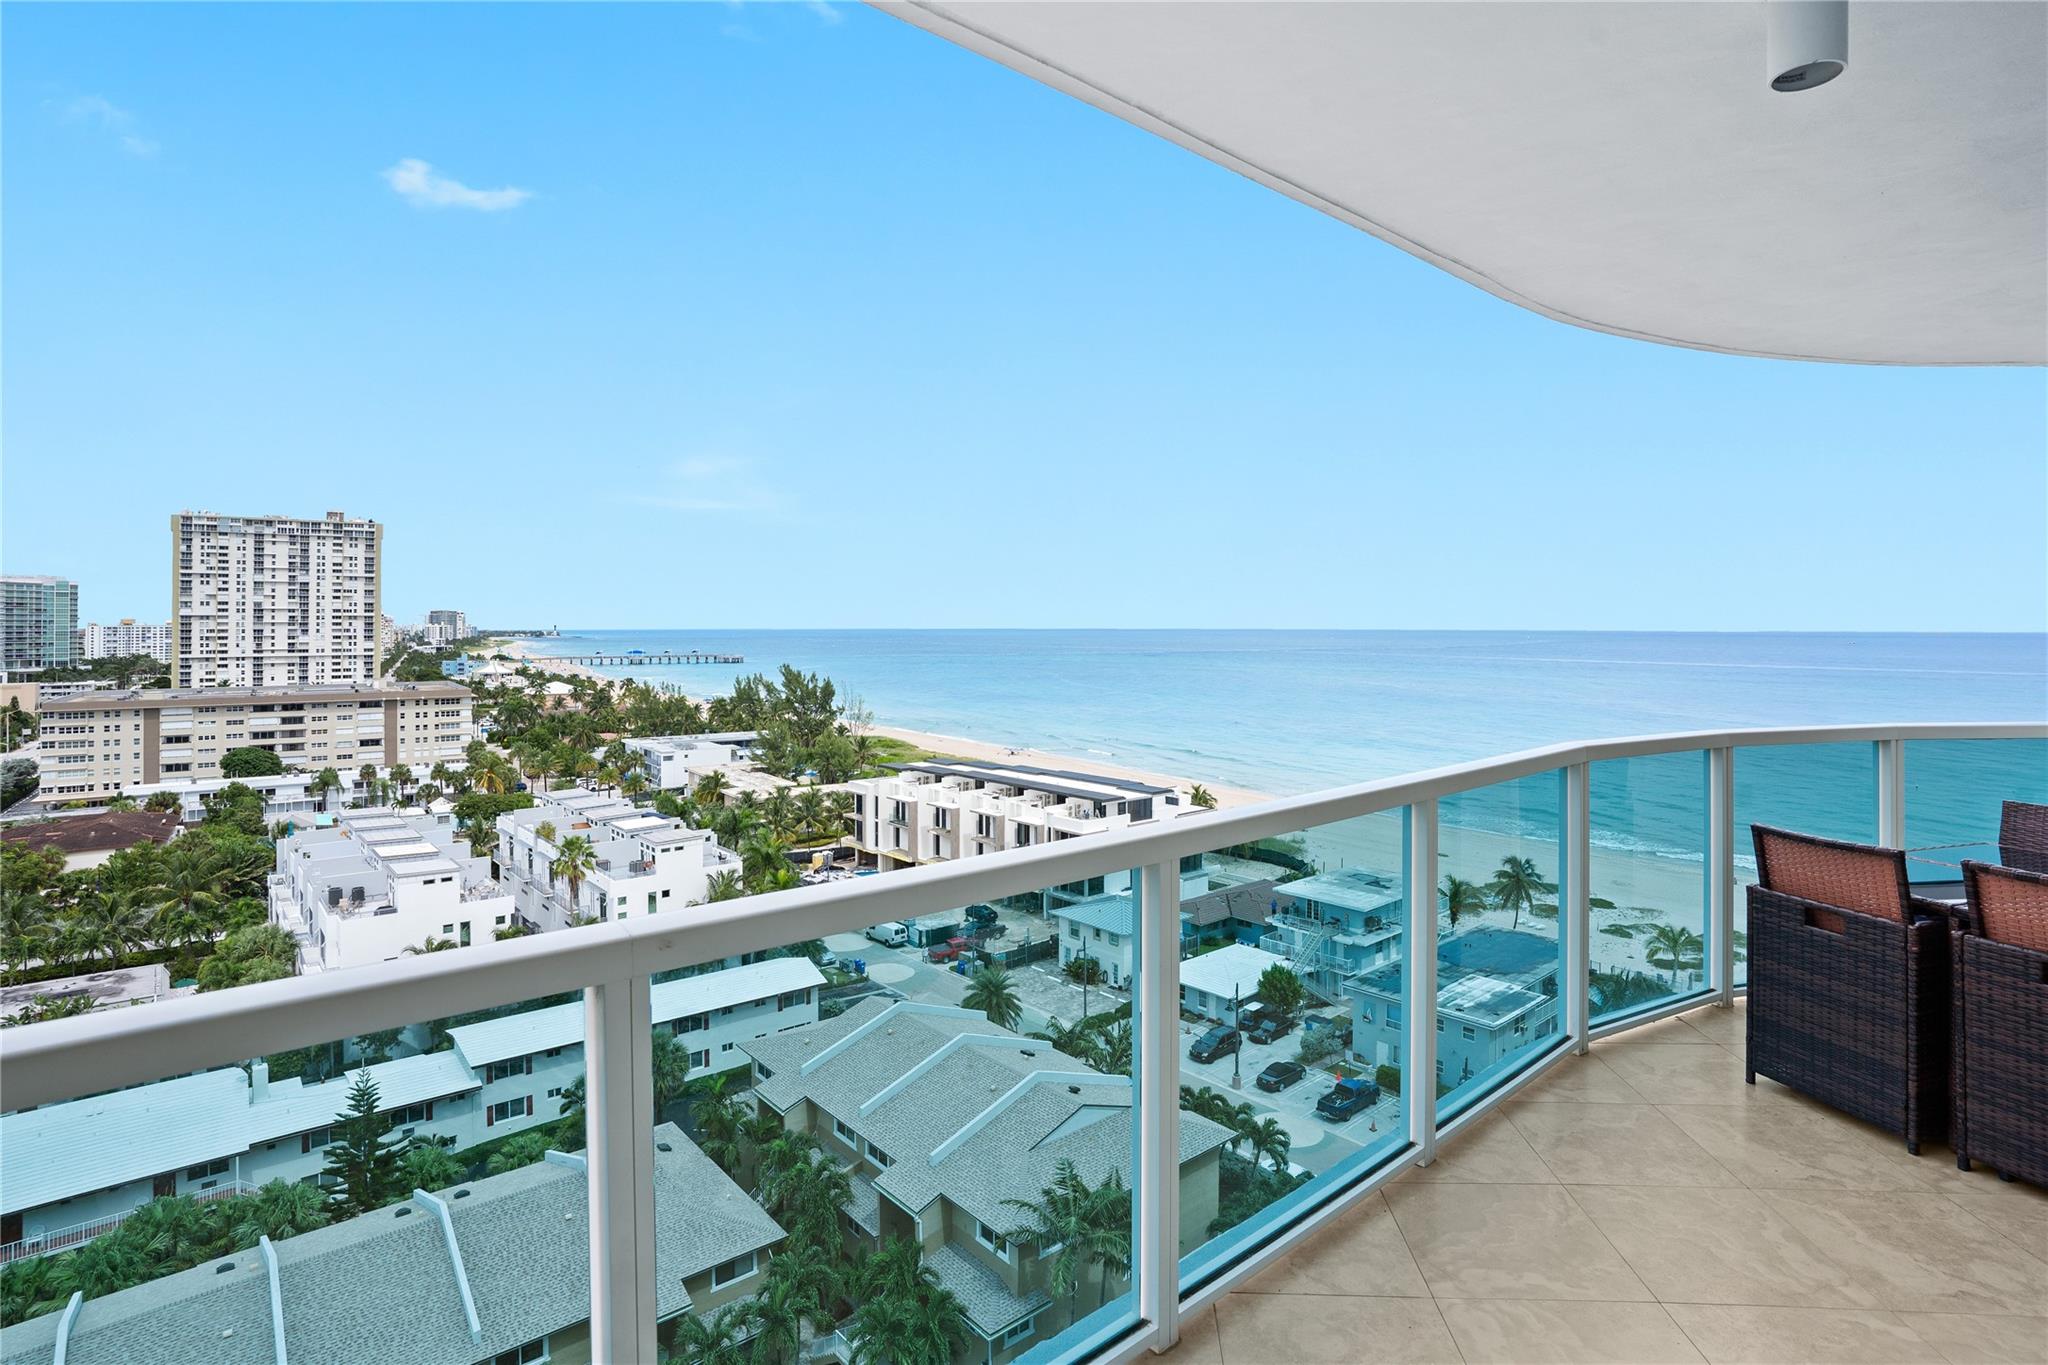 Step off your private elevator to mesmerizing UNOBSTRUCTED OCEAN views going all the way up the beach. Entertainer's dream floor plan with 30' open living and dining area overlooking the shore and leading out to the large balcony. Master suite with ocean views, 2 walk in closets, dual vanities, glass shower and spa, remote black out blinds, and balcony access. Large kitchen featuring pantry, bar top, stone counters, and wet bar. 2nd bedroom features intracoastal views, walk-in closet, and balcony, 3rd bed with custom glass wall with blackouts. Modern Boutique building of 64 residences, no assessments, HOA w/ reserves, private beach club with pool, jacuzzi, cabana and bbq. Fitness center, garage parking, pet friendly. Steps to some of Pompano's best restaurants, shops, marina, and pier.